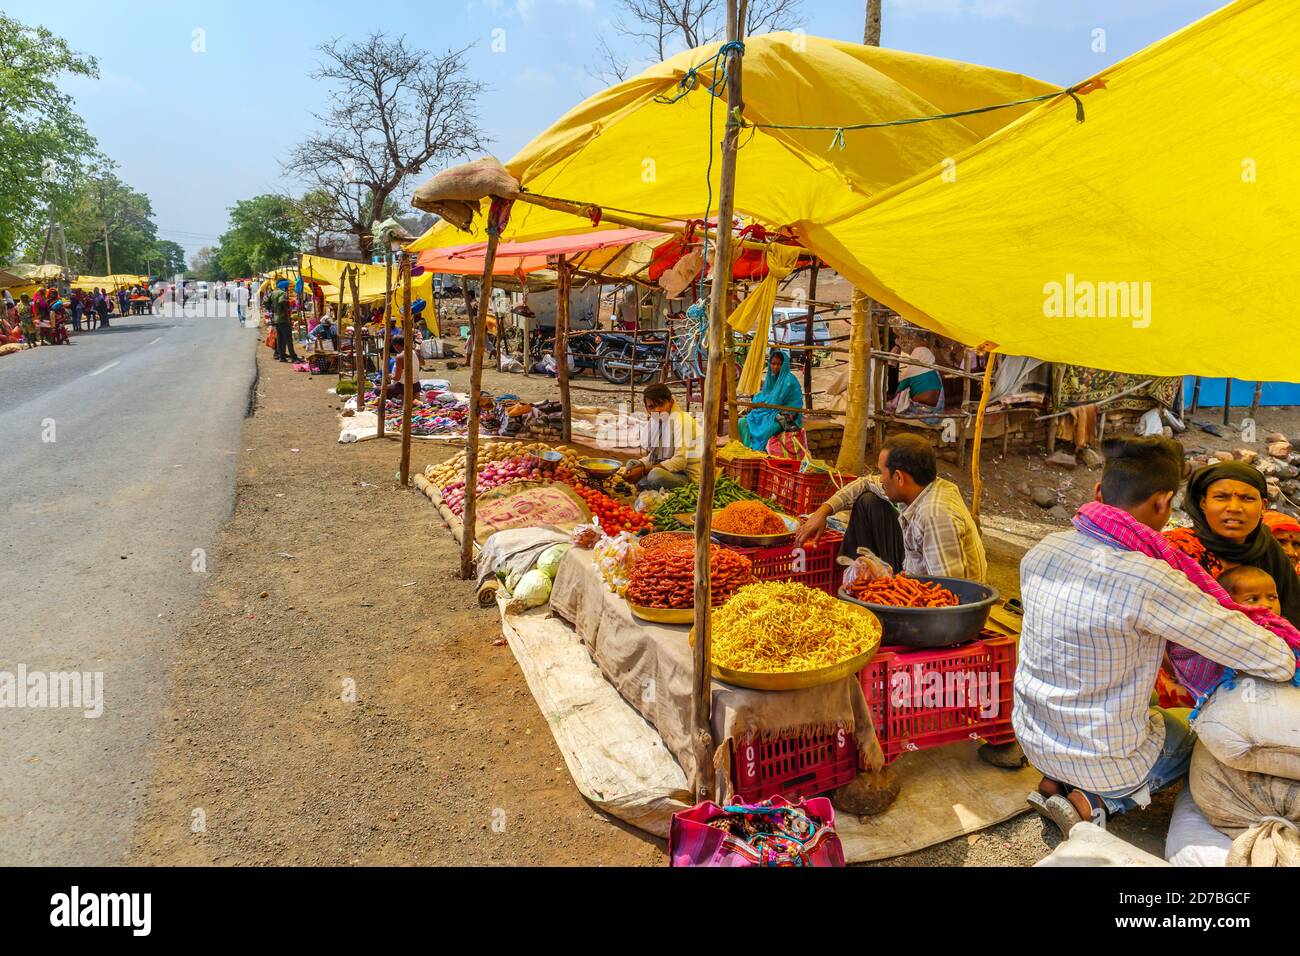 Stalls selling fresh local produce and steet food in a busy roadside market in a village in Madhya Pradesh, India Stock Photo